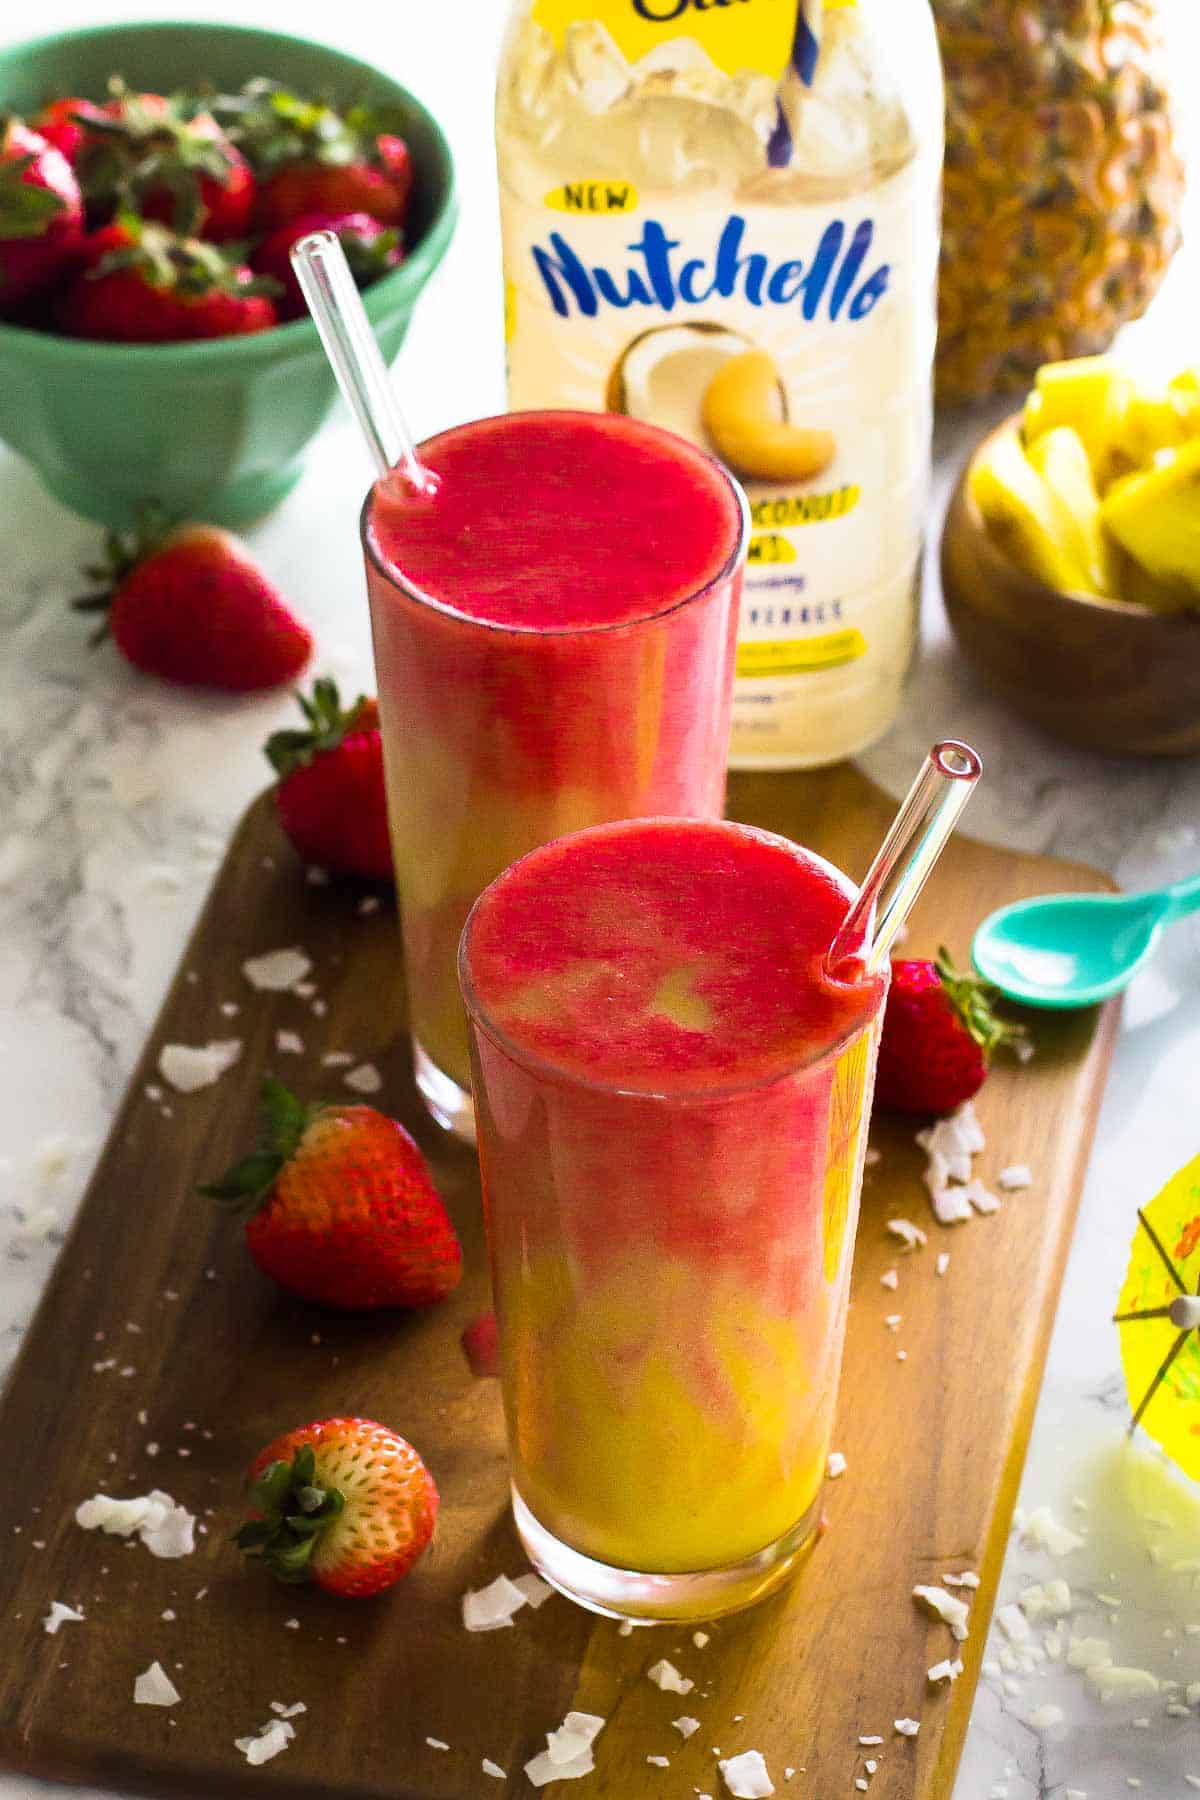 Tow tall glasses of strawberry pineapple coconut smoothies.